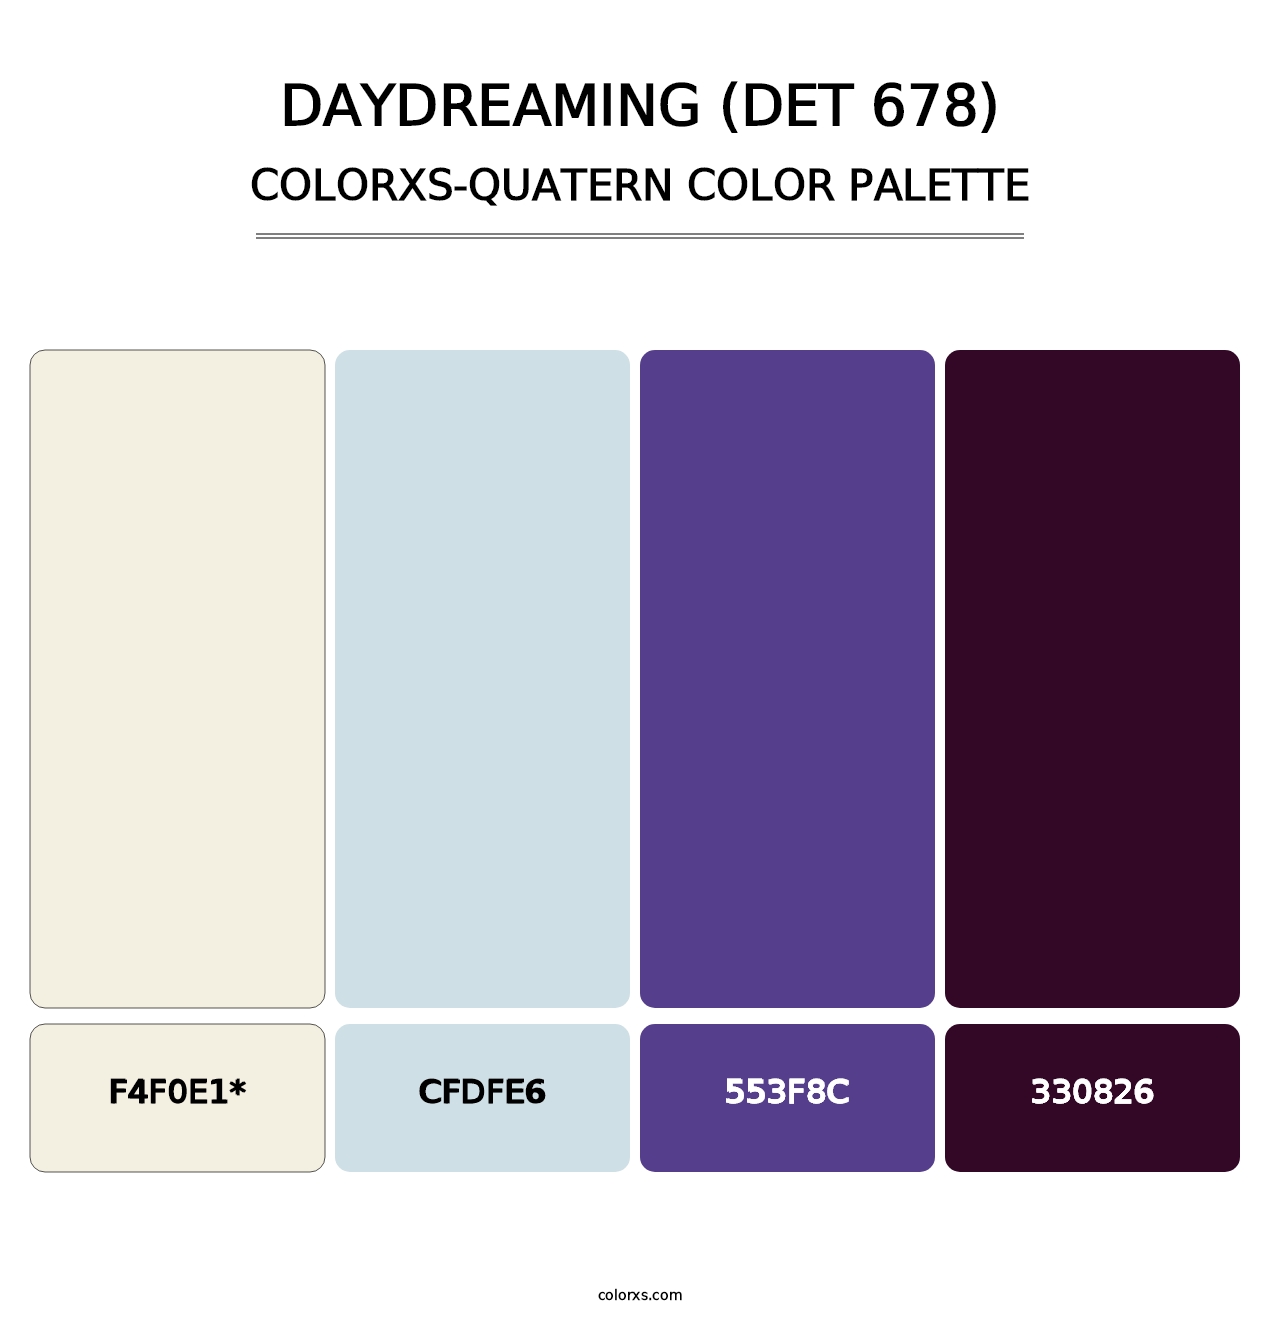 Daydreaming (DET 678) - Colorxs Quatern Palette